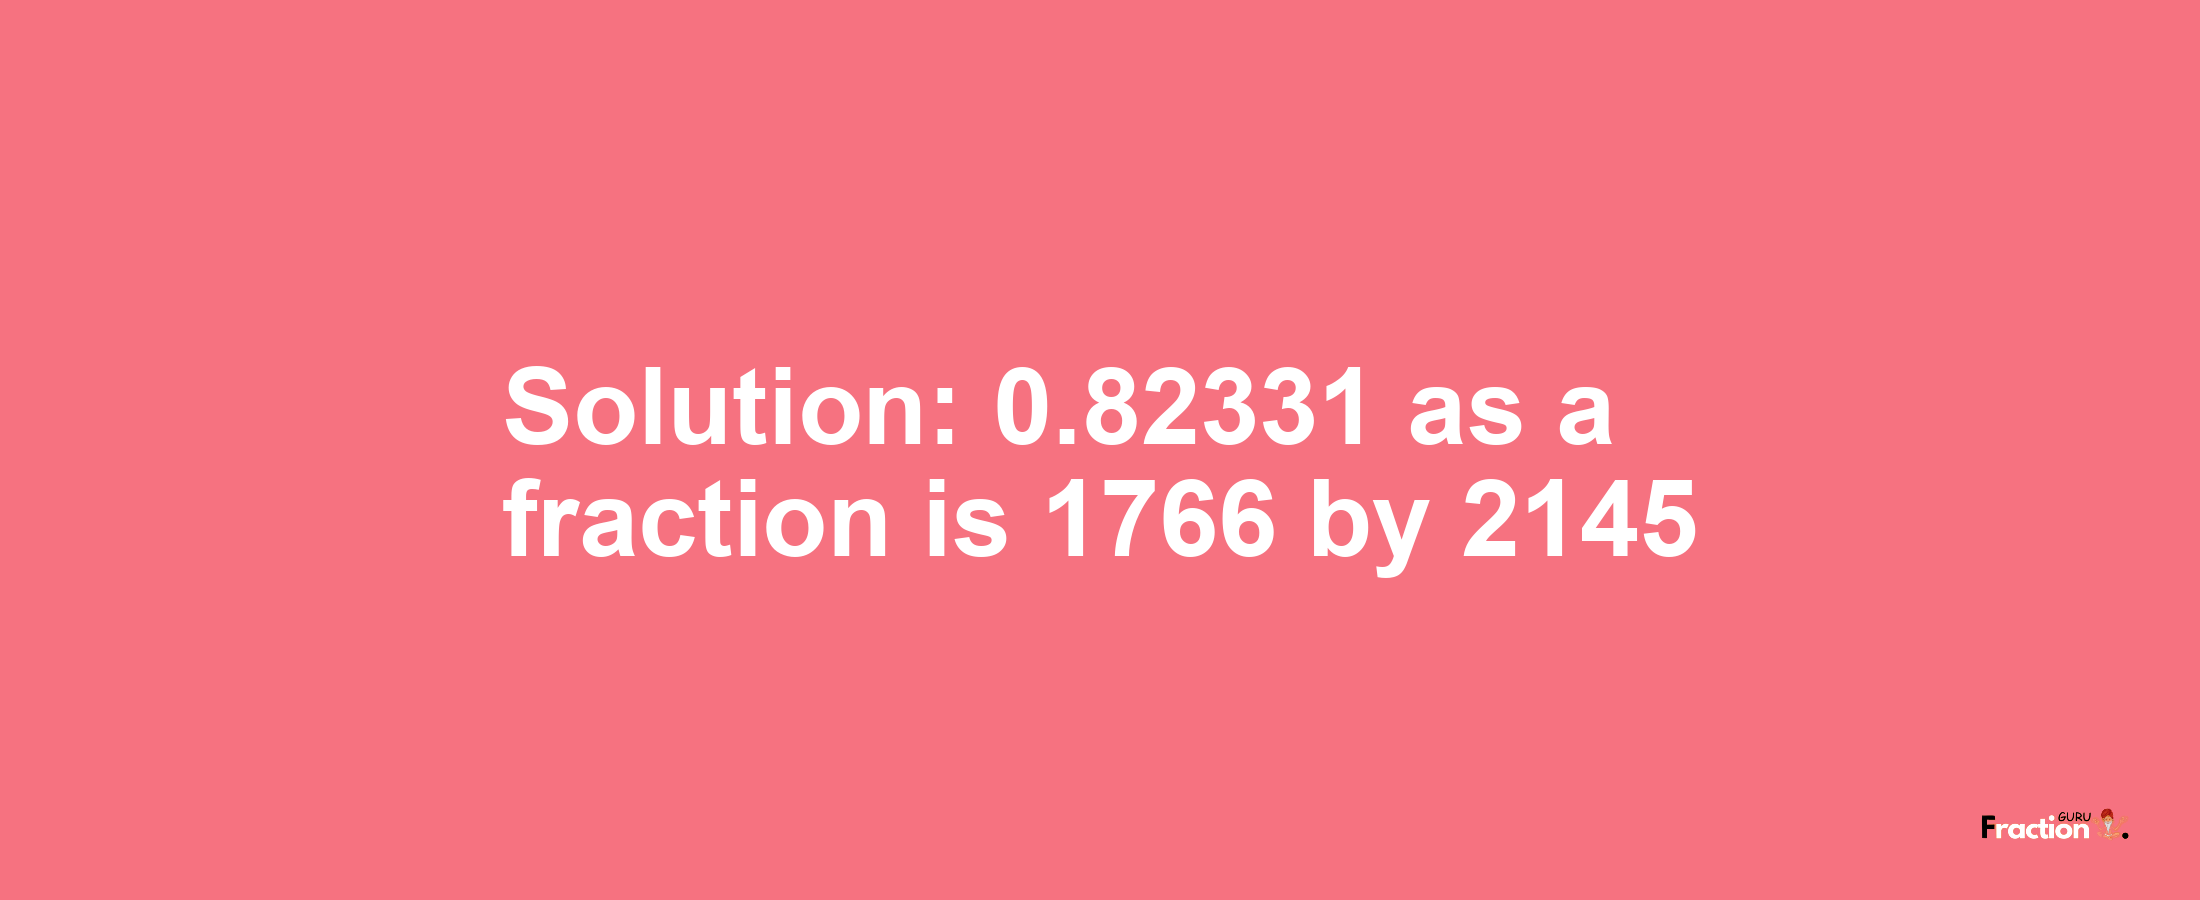 Solution:0.82331 as a fraction is 1766/2145